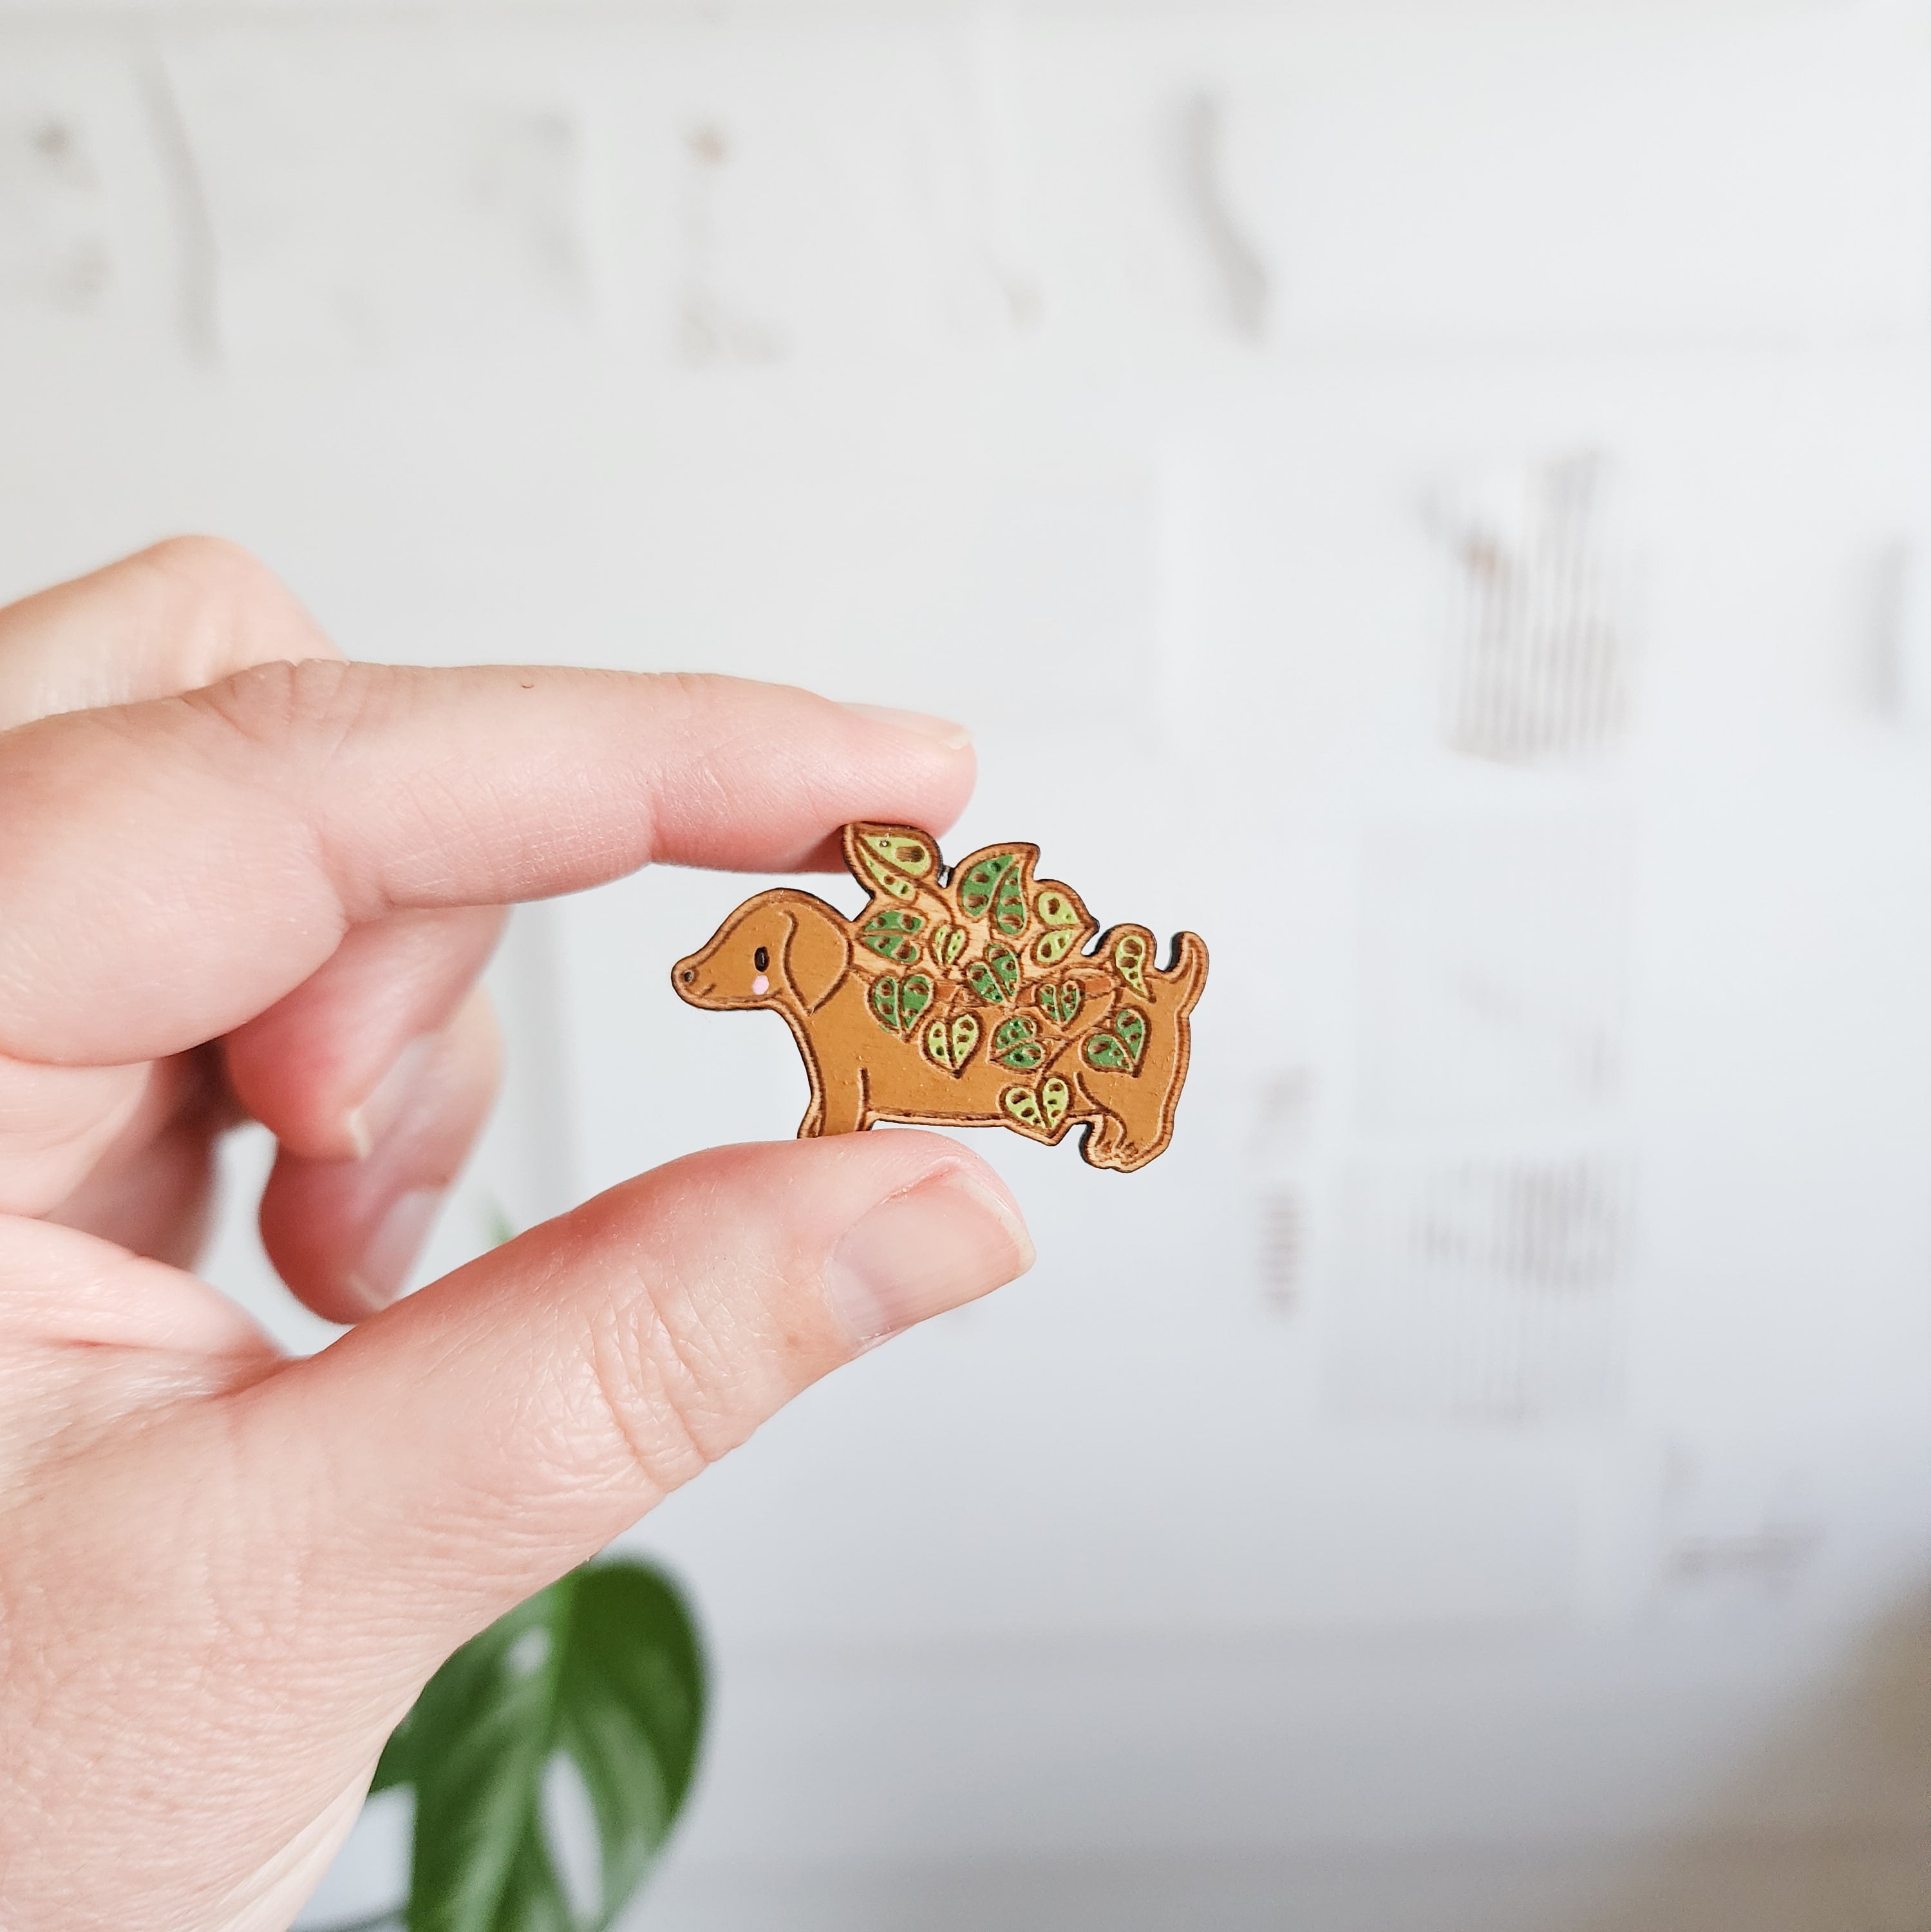 dachshund planter pin held between two fingers